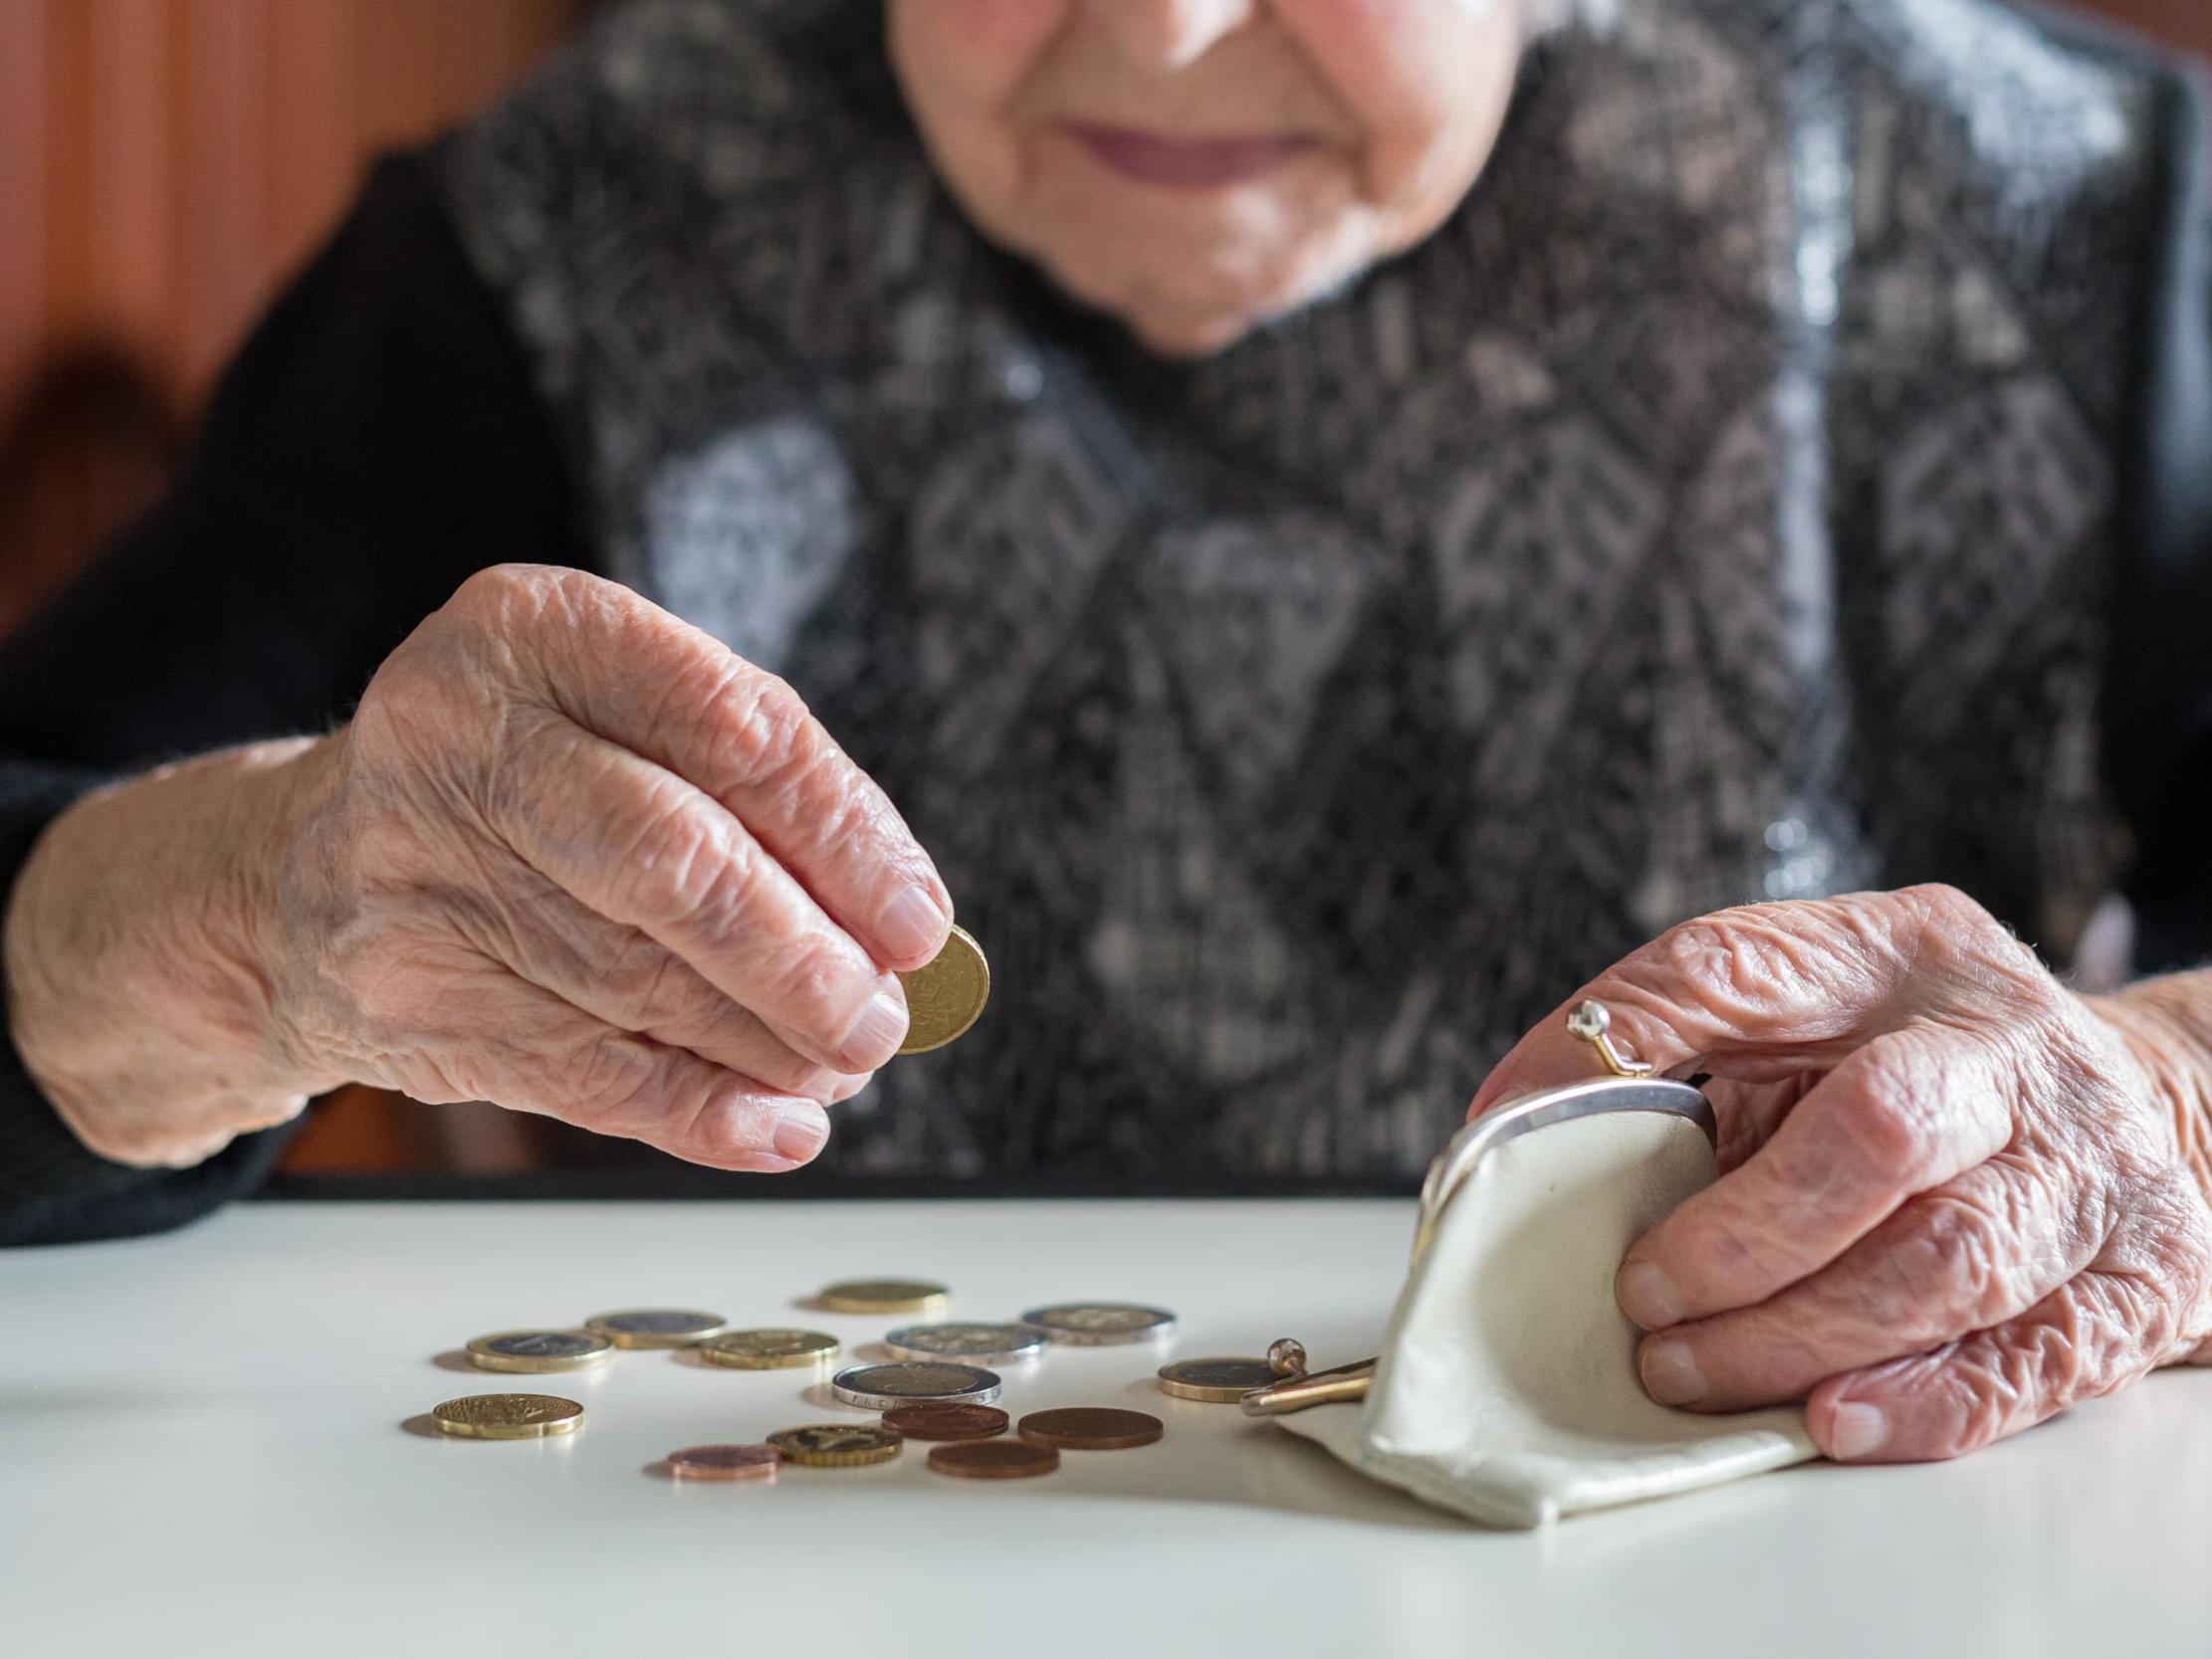 Researchers discovered the rise in the state pension age has triggered a 30 per cent rise in the likelihood of experiencing depressive symptoms for women doing physically and psychosocially demanding jobs